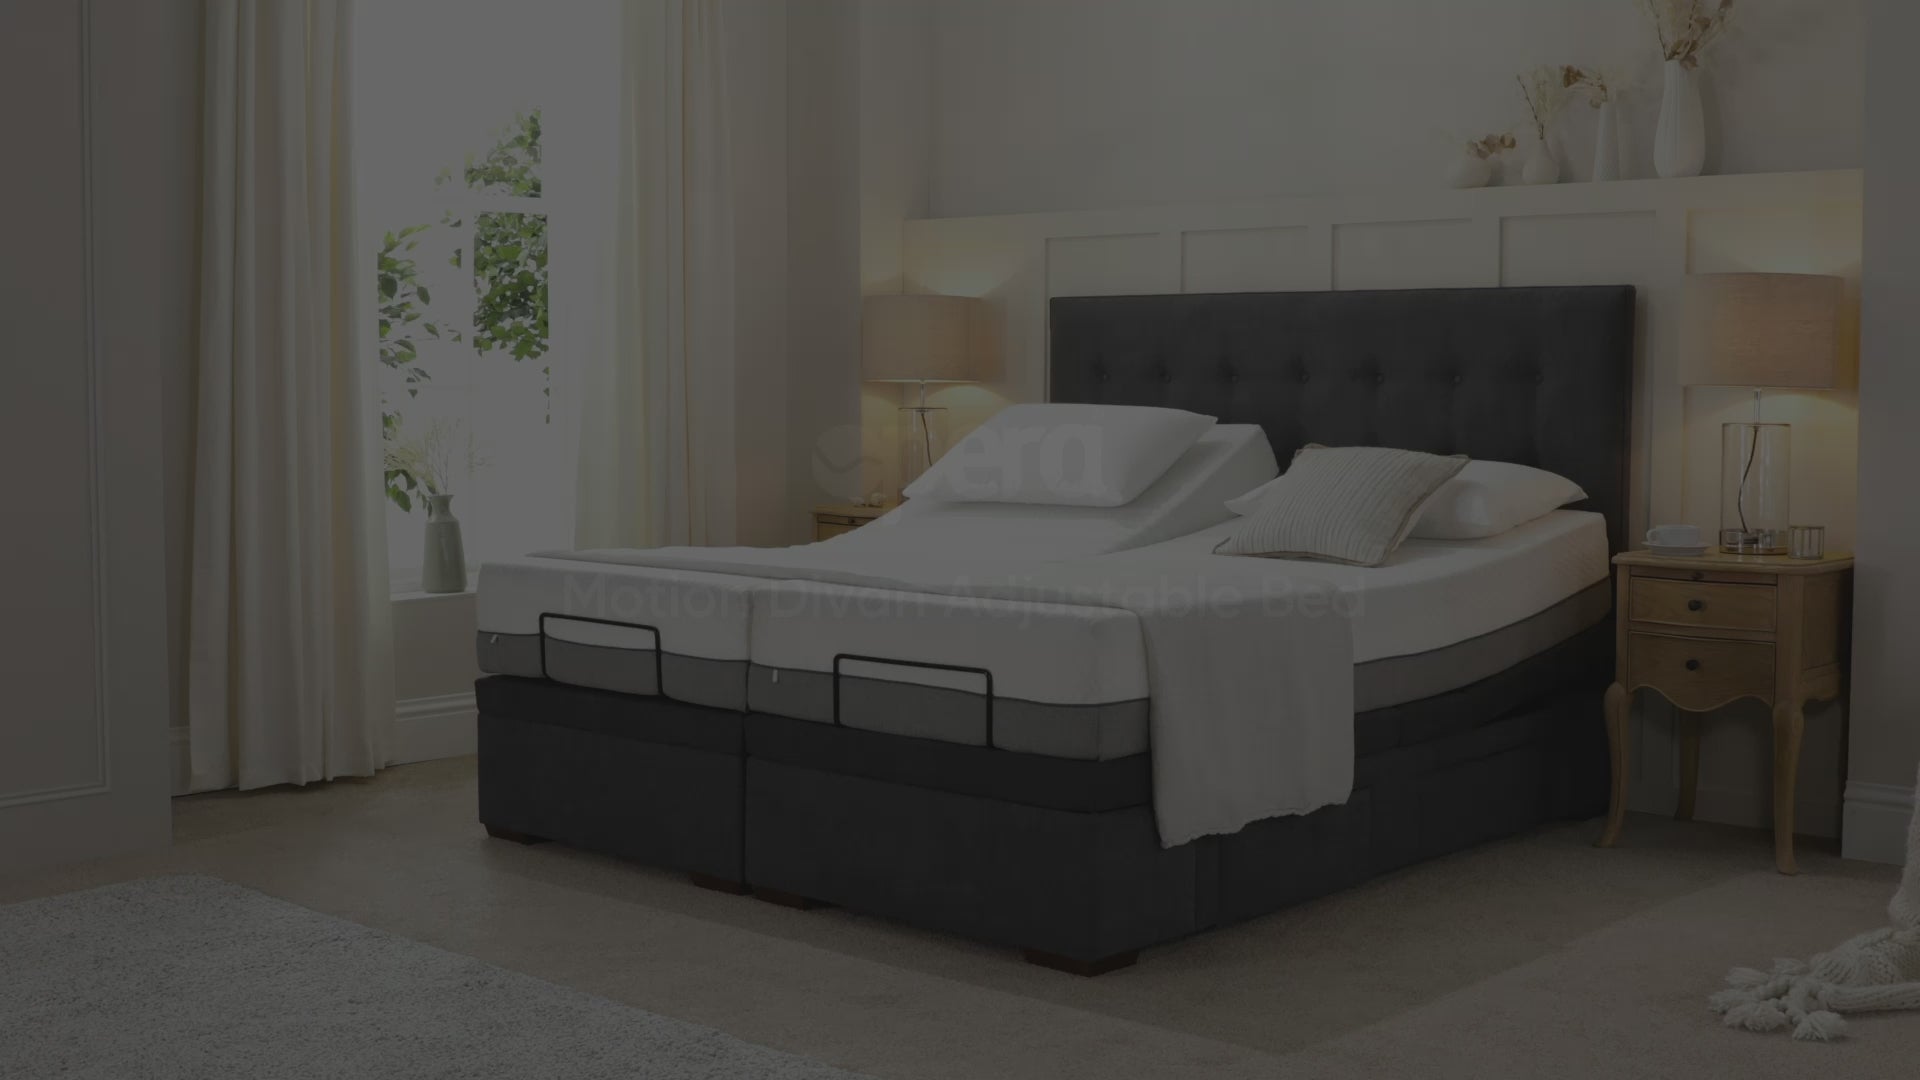 a video about the motion divan with information about the bed include the feature and what it looks like when in use